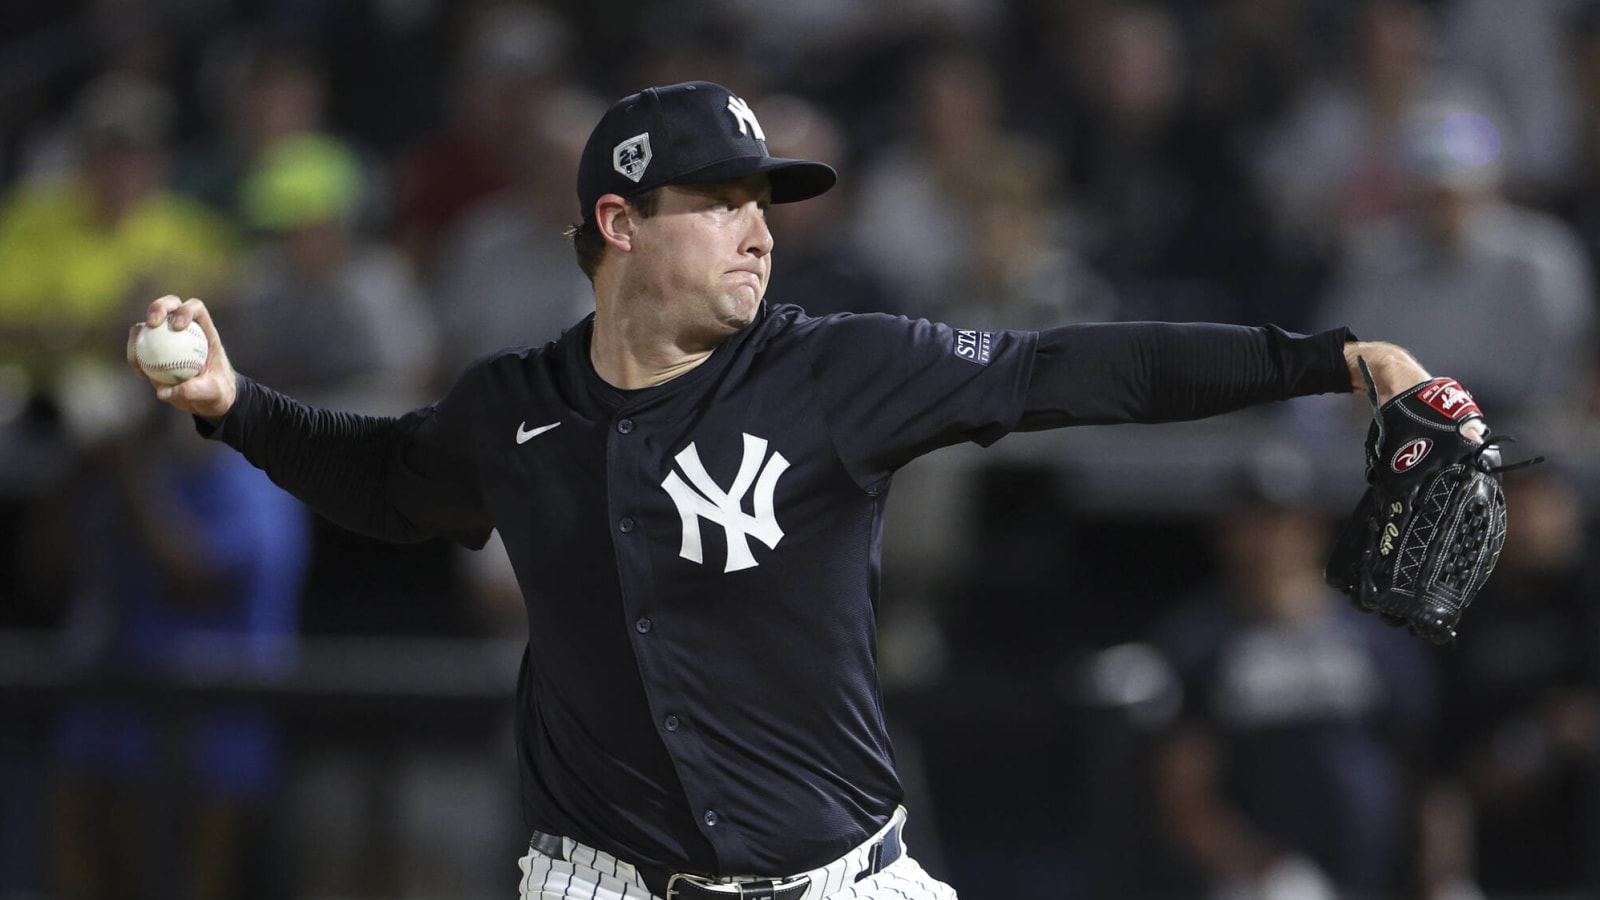 Yankees could place star pitcher on 60-day injured list to open roster spot